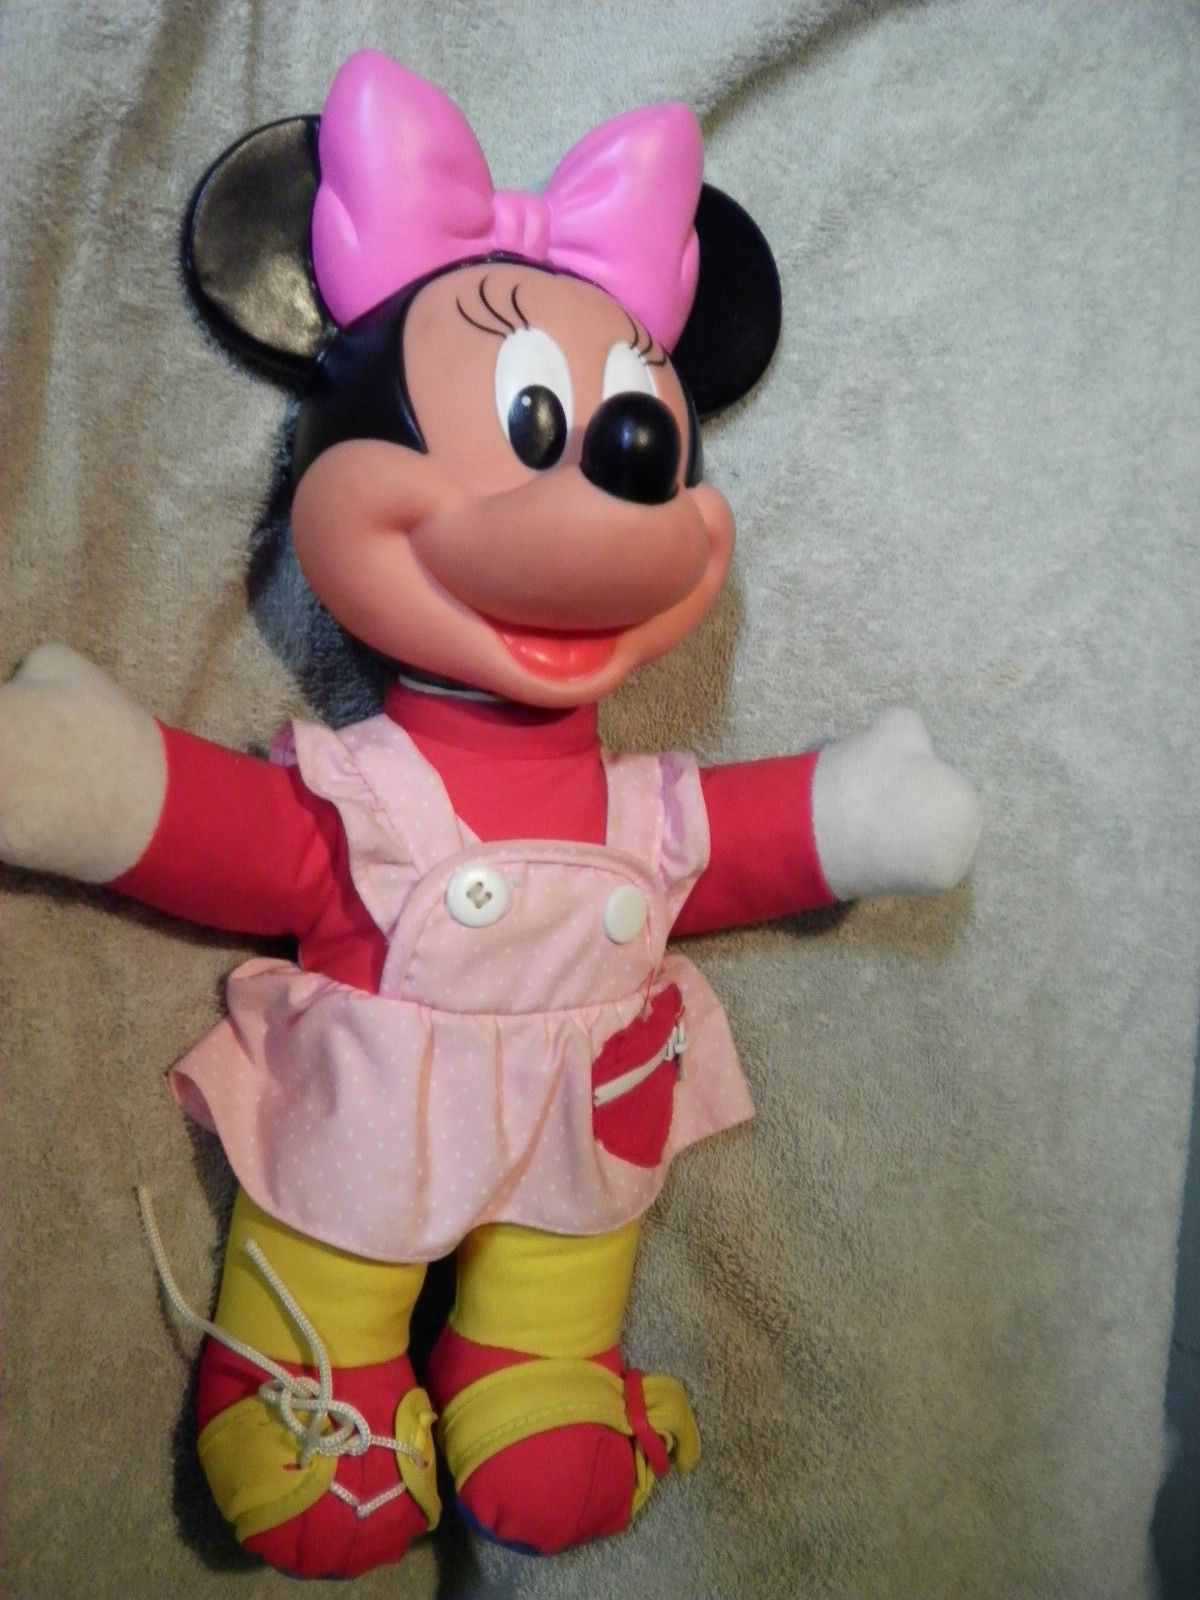 plastic minnie mouse doll